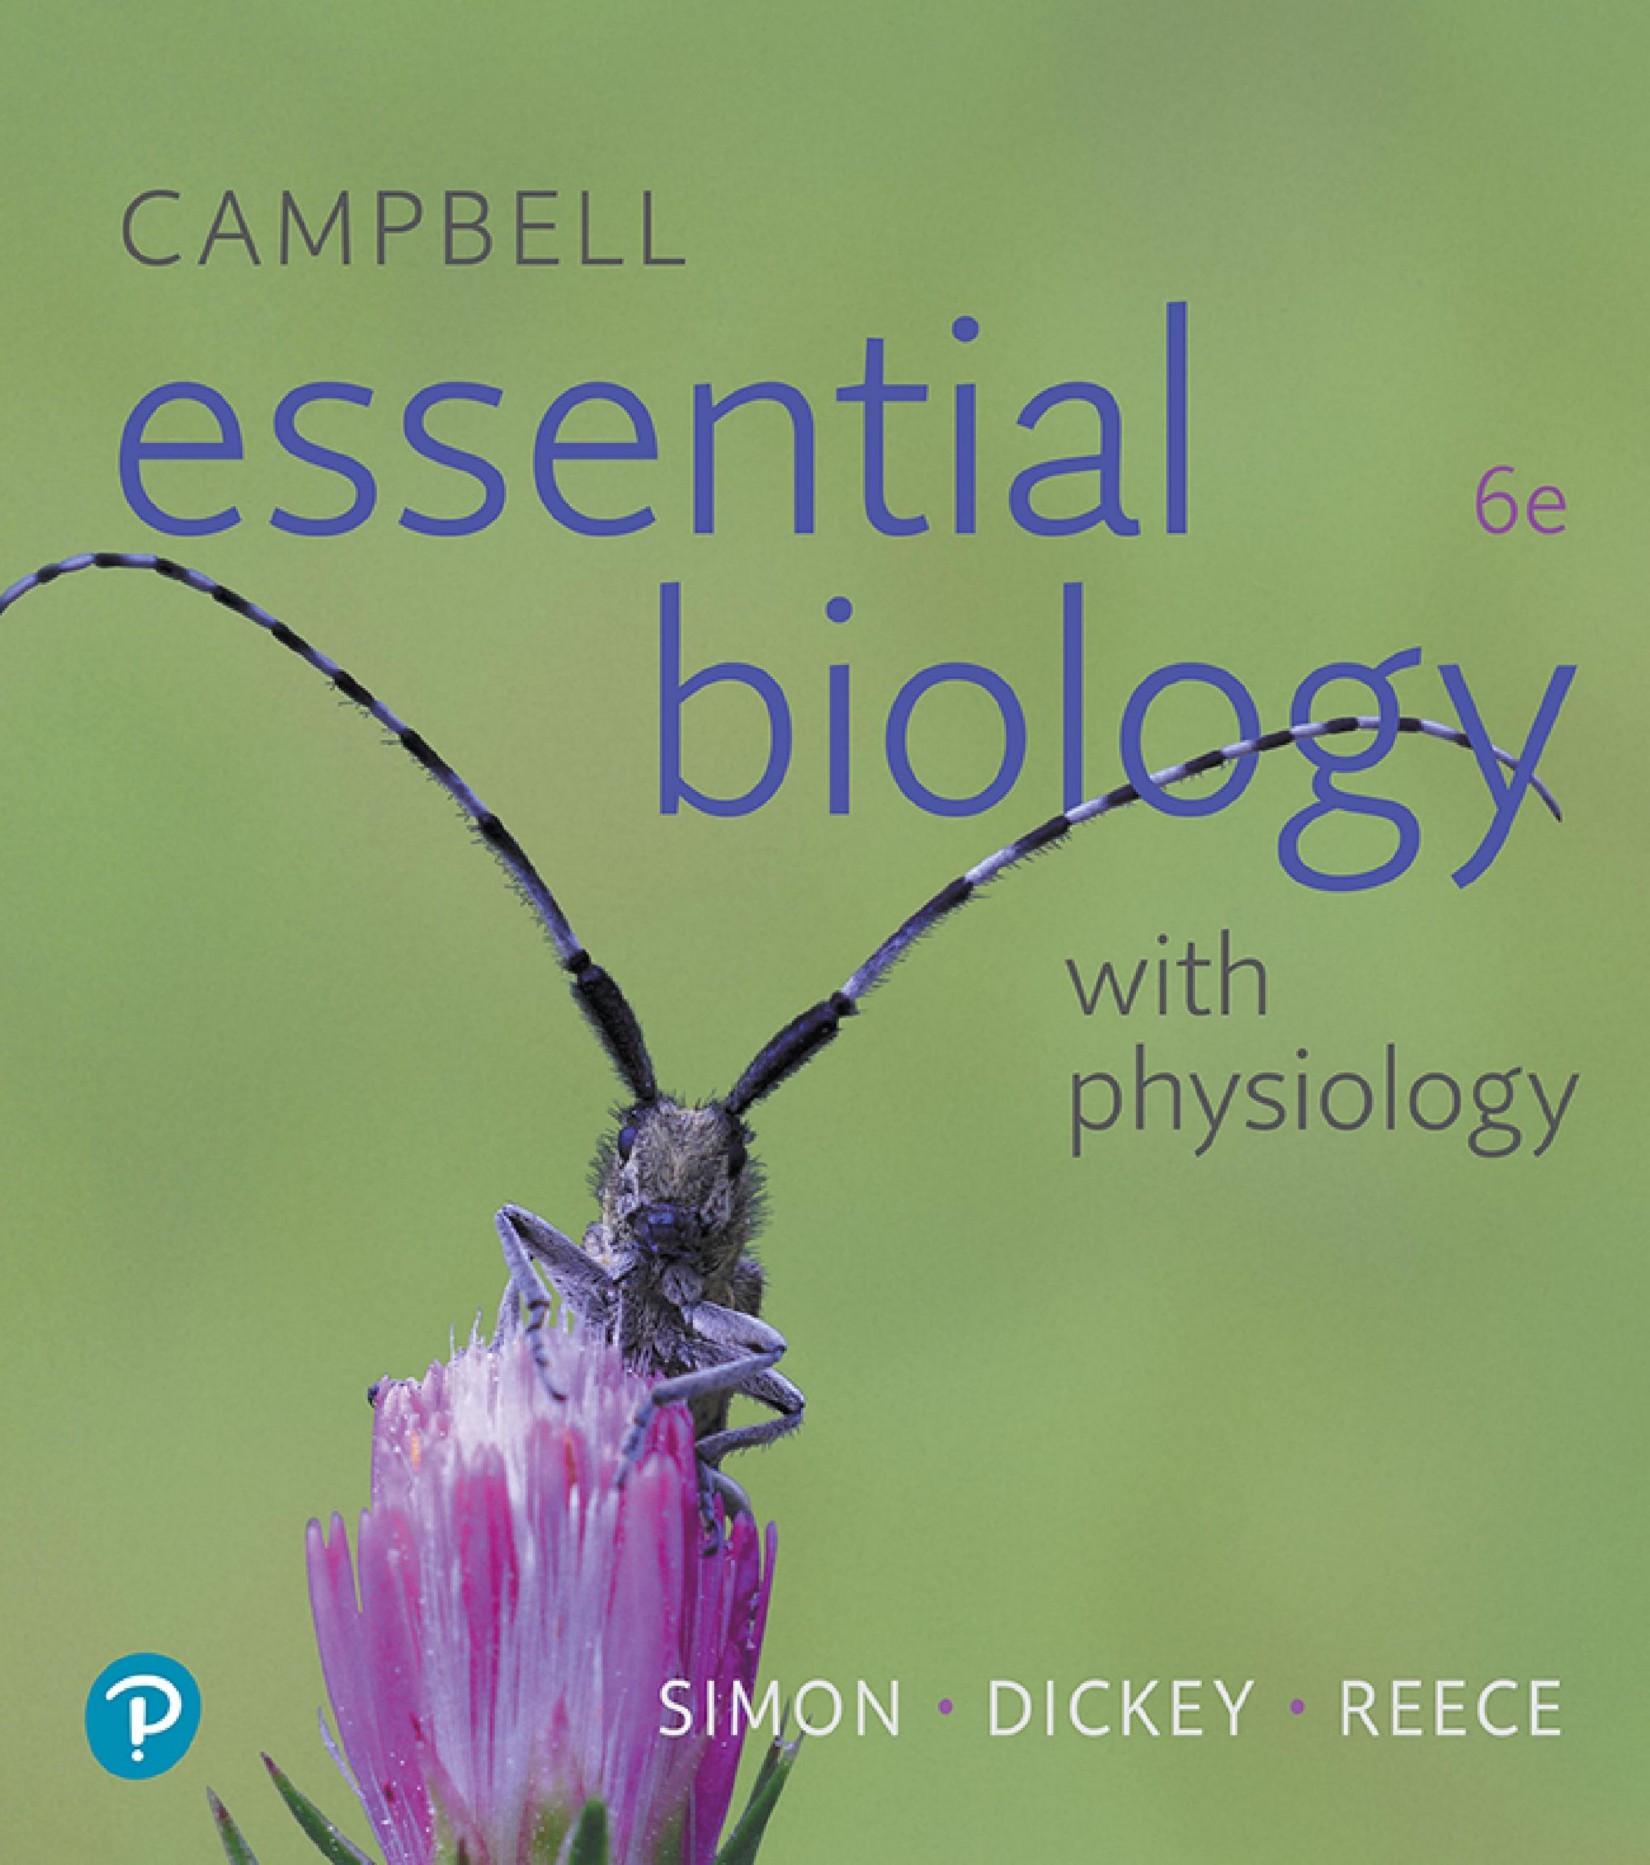 Campbell Essential Biology with Physiology 6th.jpg